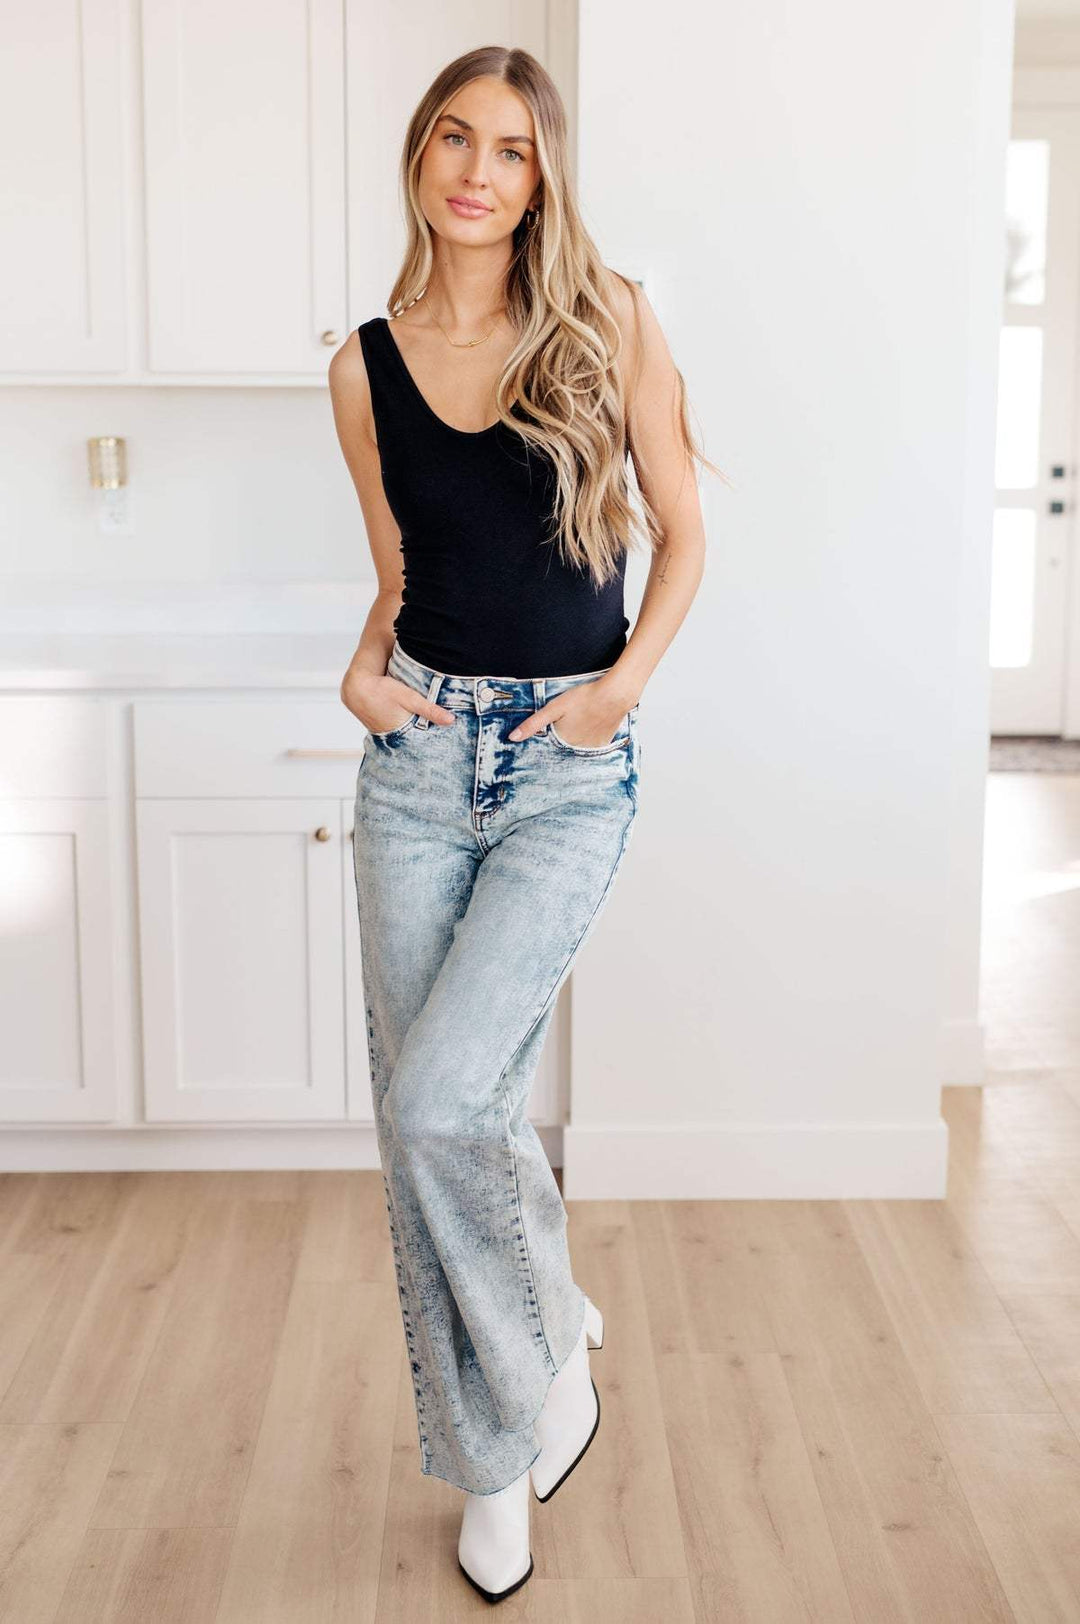 Judy Blue - Wide Leg Jeans - Mineral Wash - Inspired Eye Boutique